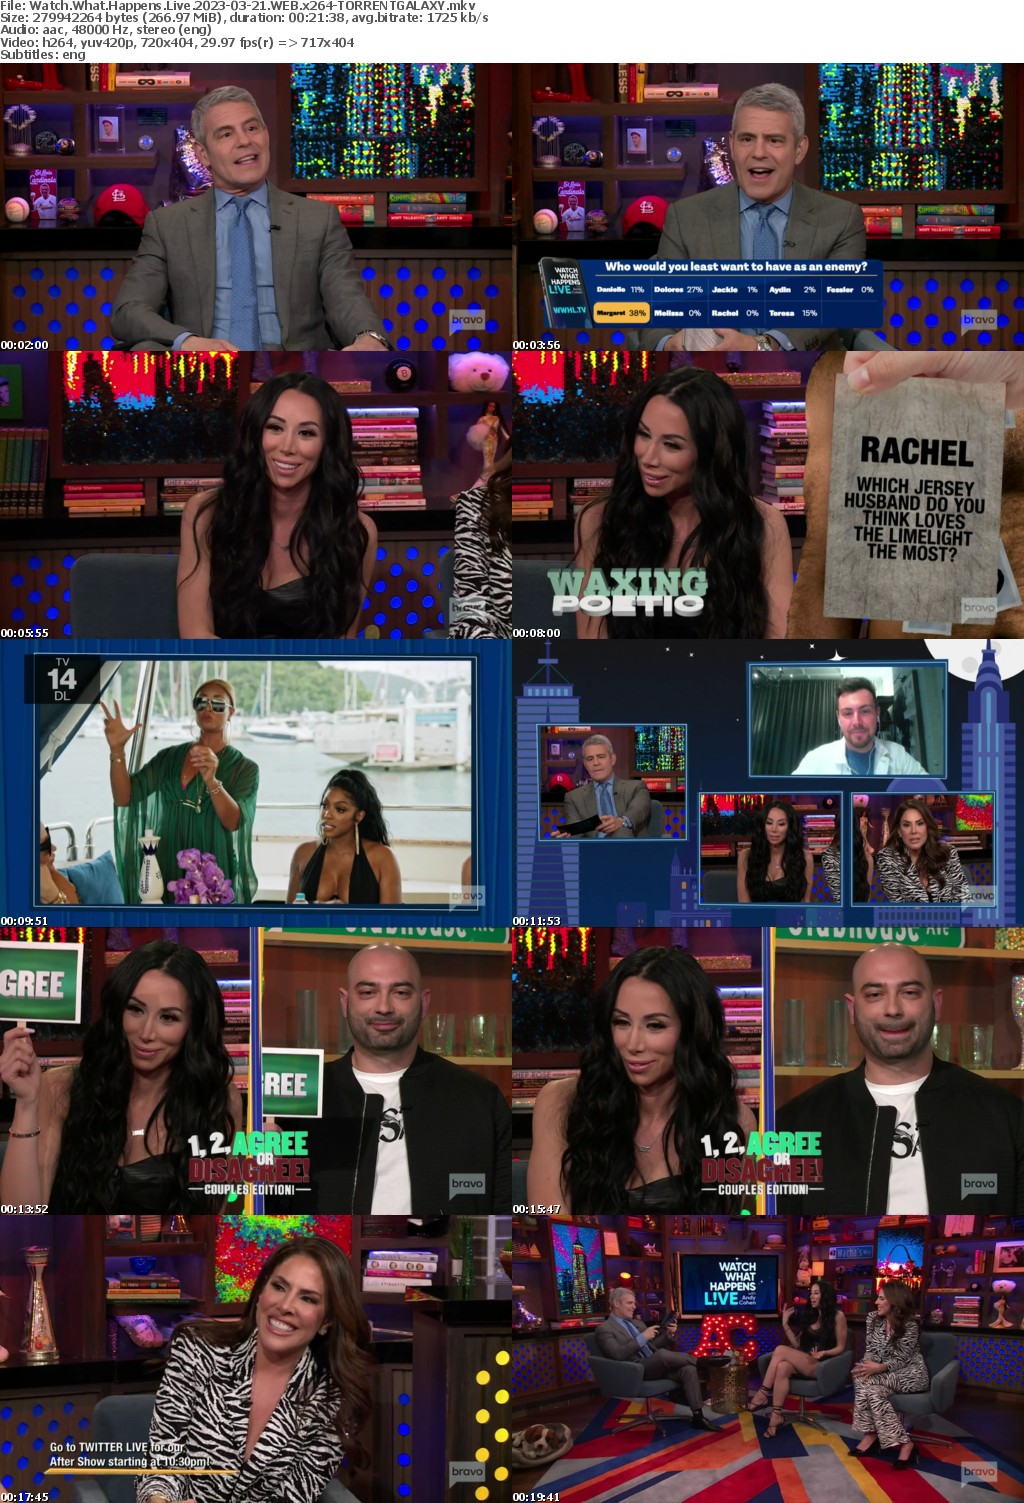 Watch What Happens Live 2023-03-21 WEB x264-GALAXY